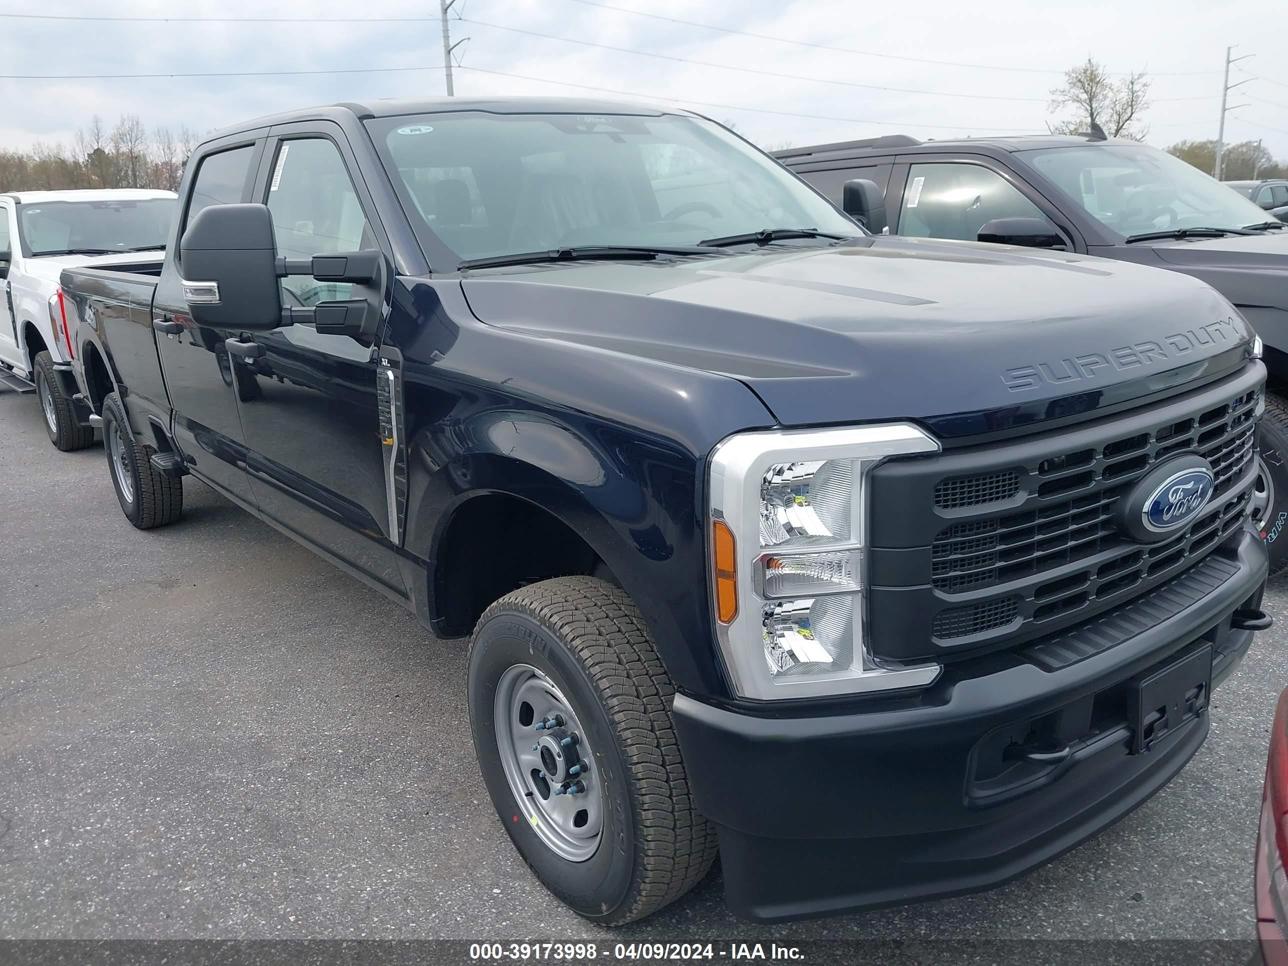 VIN: 1FT7W2BA0RED58245 - ford f250